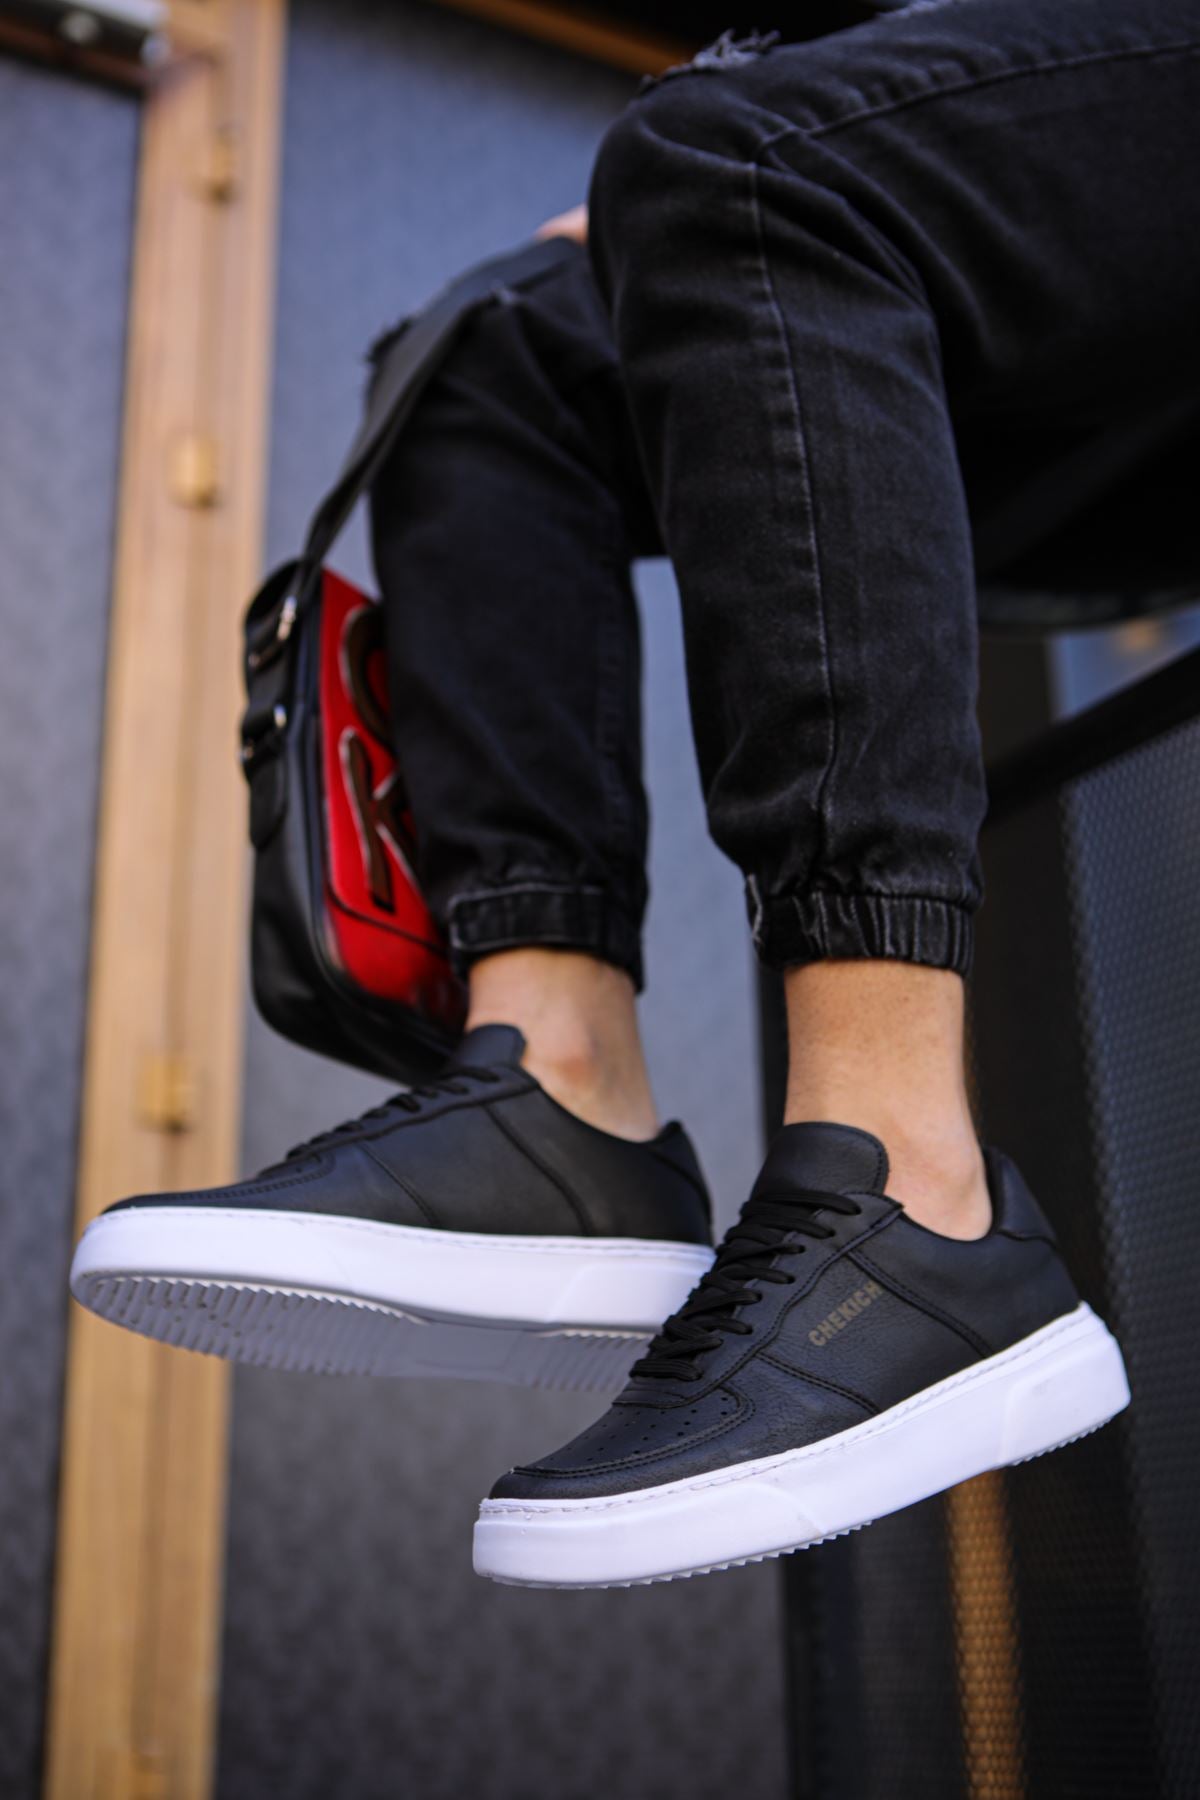 CH087 Men's Black-White Sole Lace-up Casual Sneaker Sports Shoes - STREETMODE ™